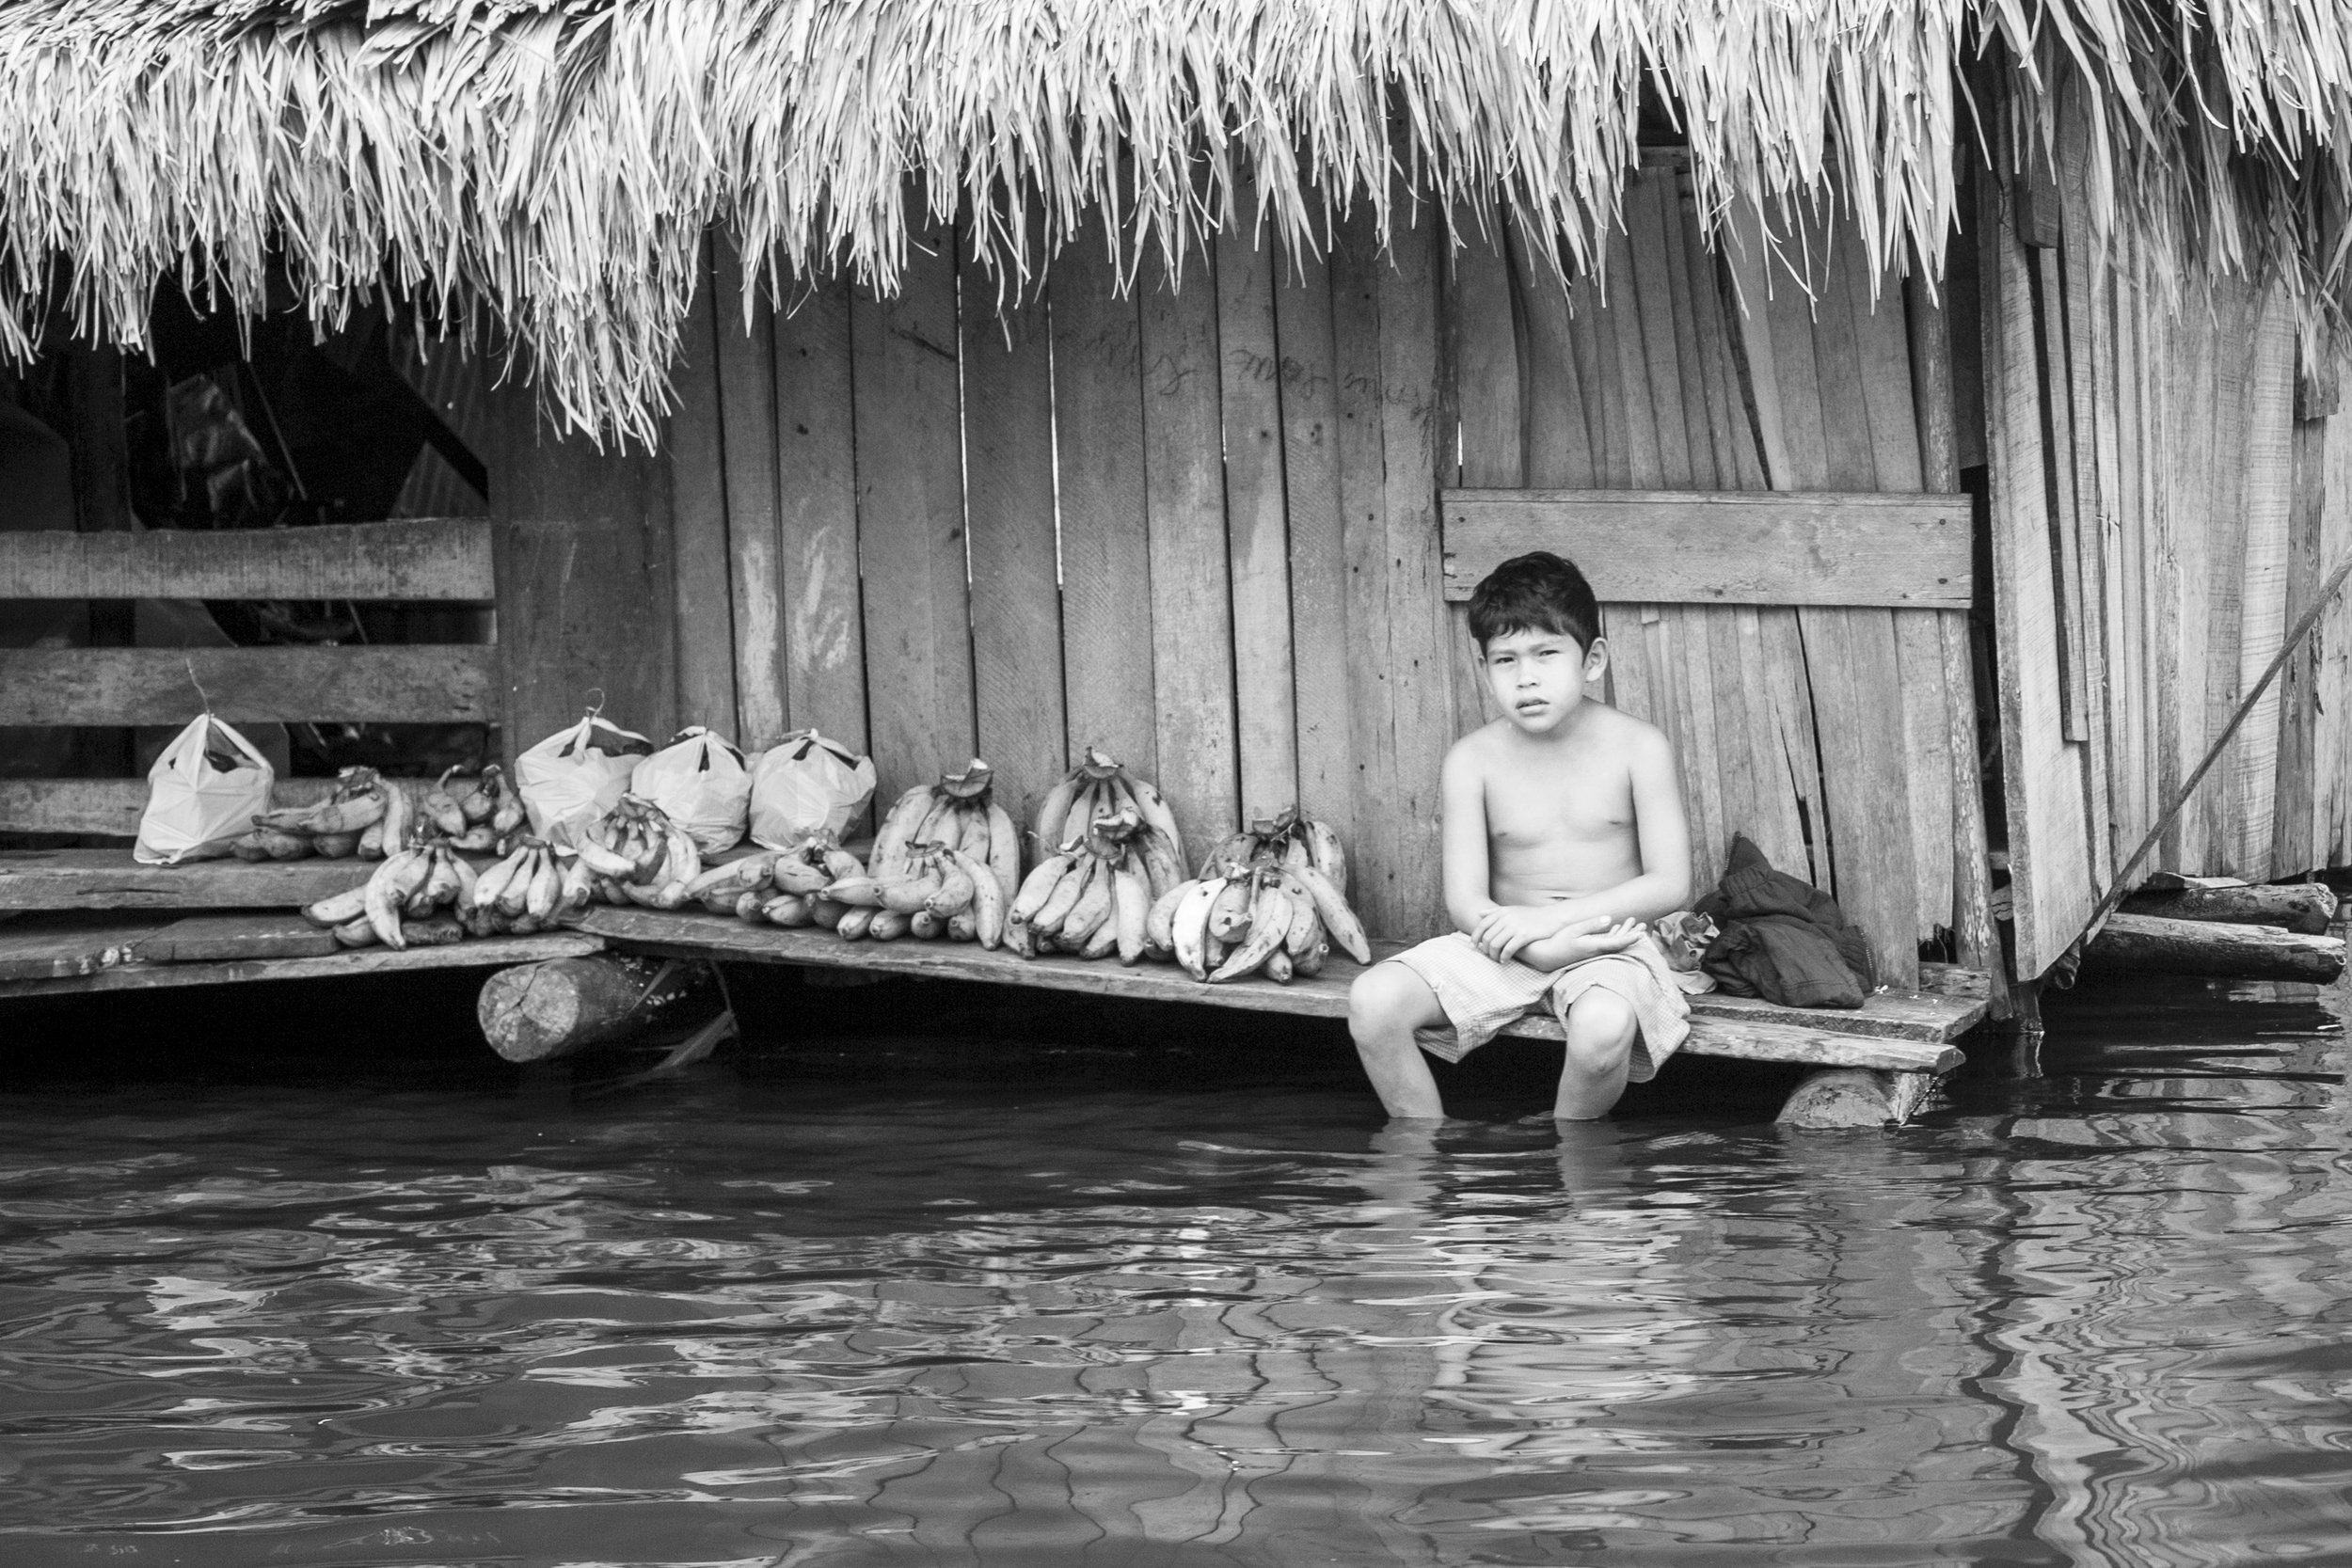 Portraits of Peru, Iquitos, by Geraint Rowland Photography.